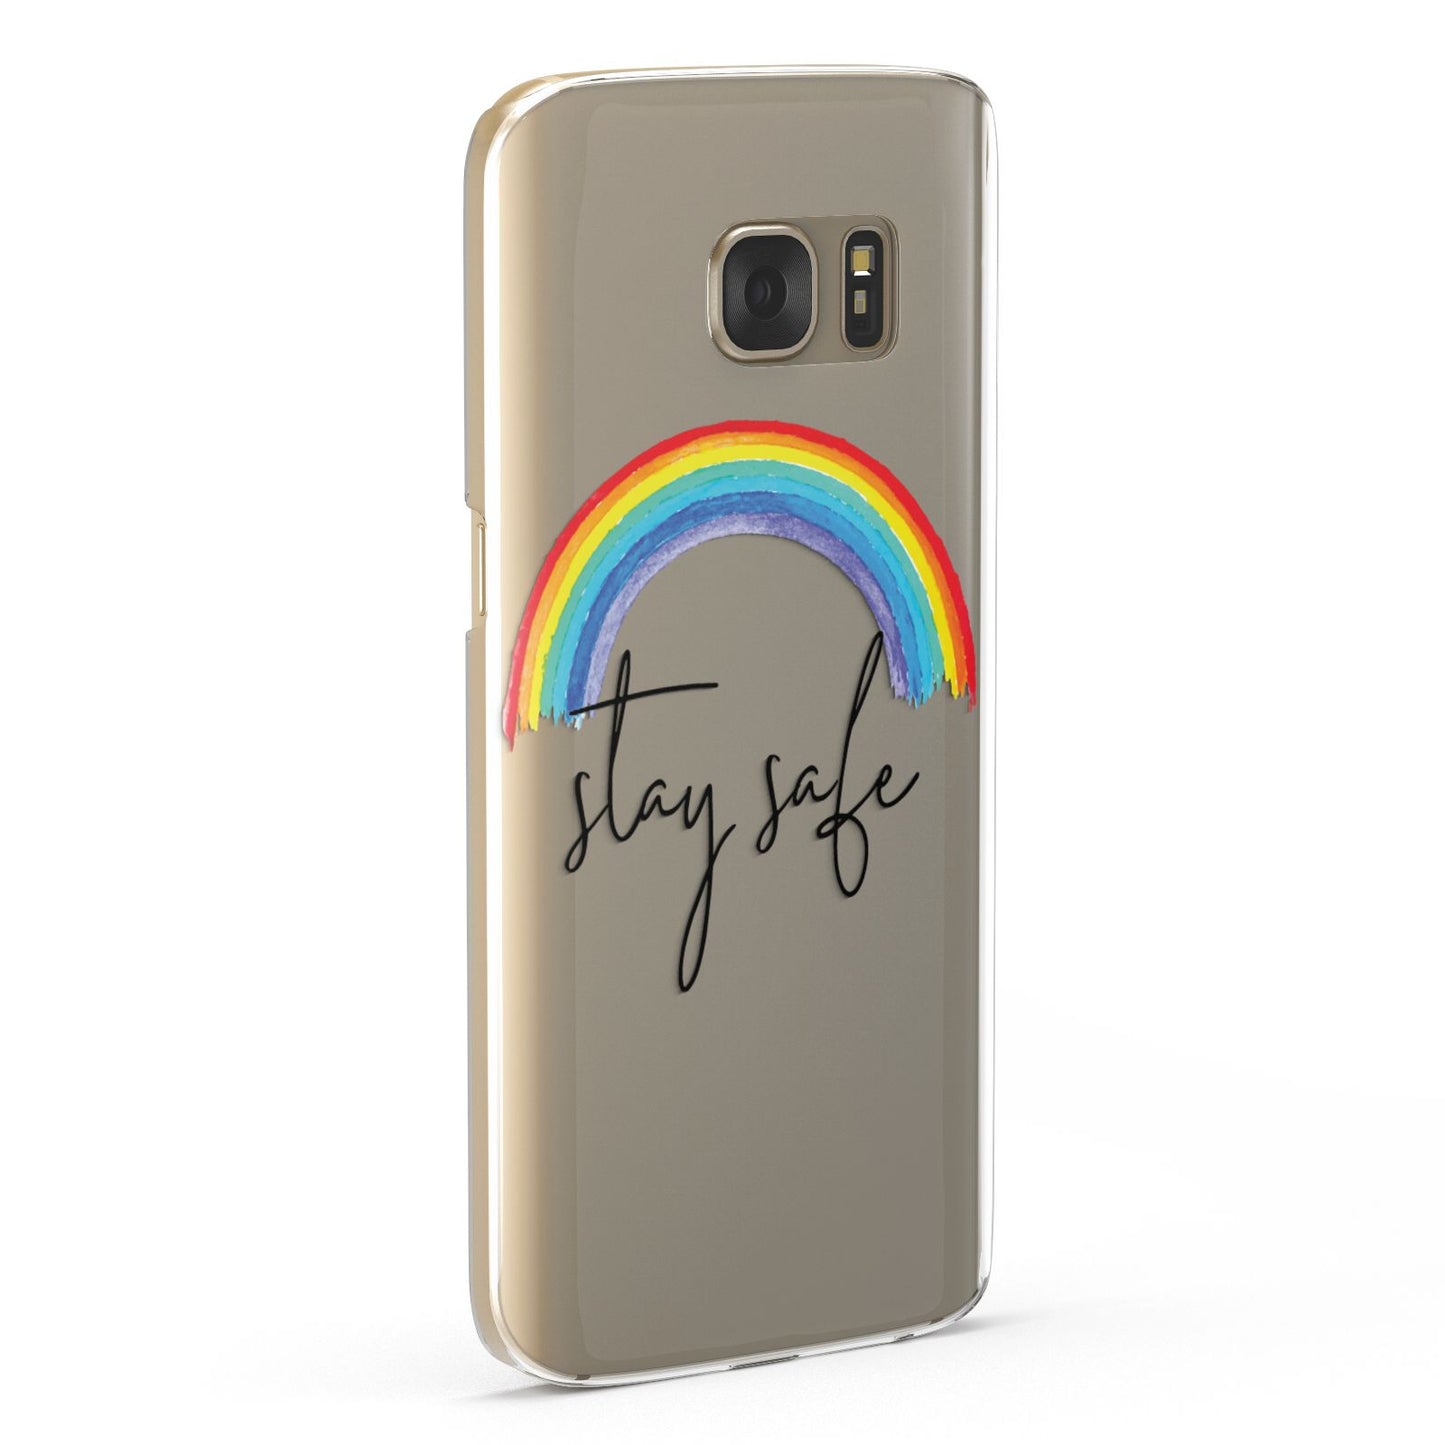 Stay Safe Rainbow Samsung Galaxy Case Fourty Five Degrees